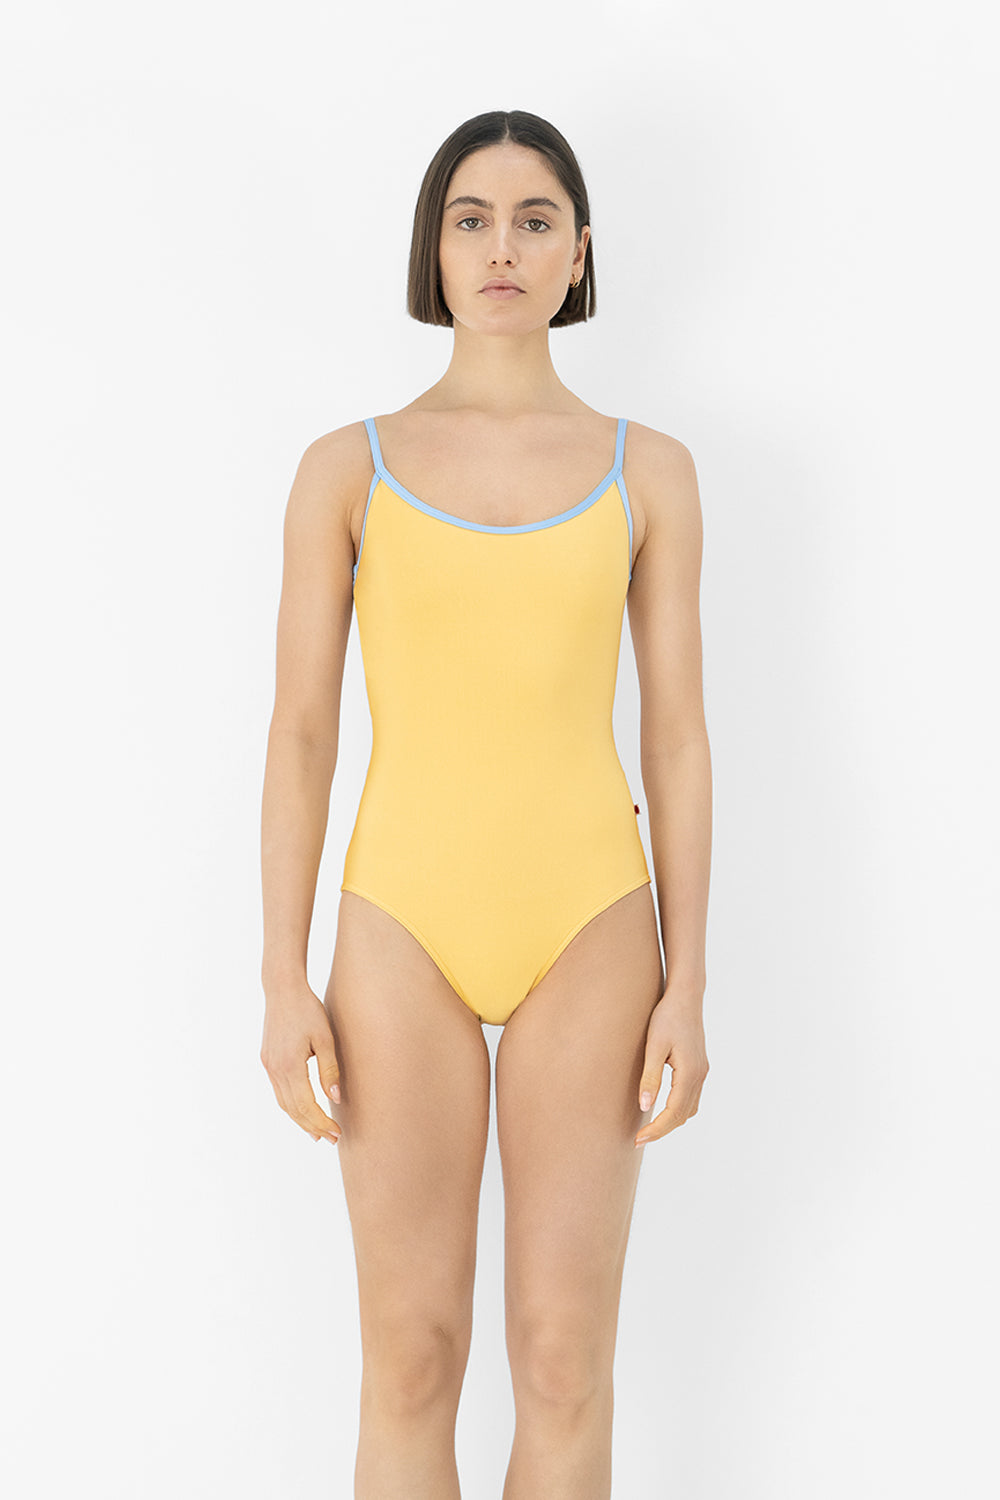 Fiona leotard in N-Daffodil body color with Mesh White top color and N-Moontide trim color